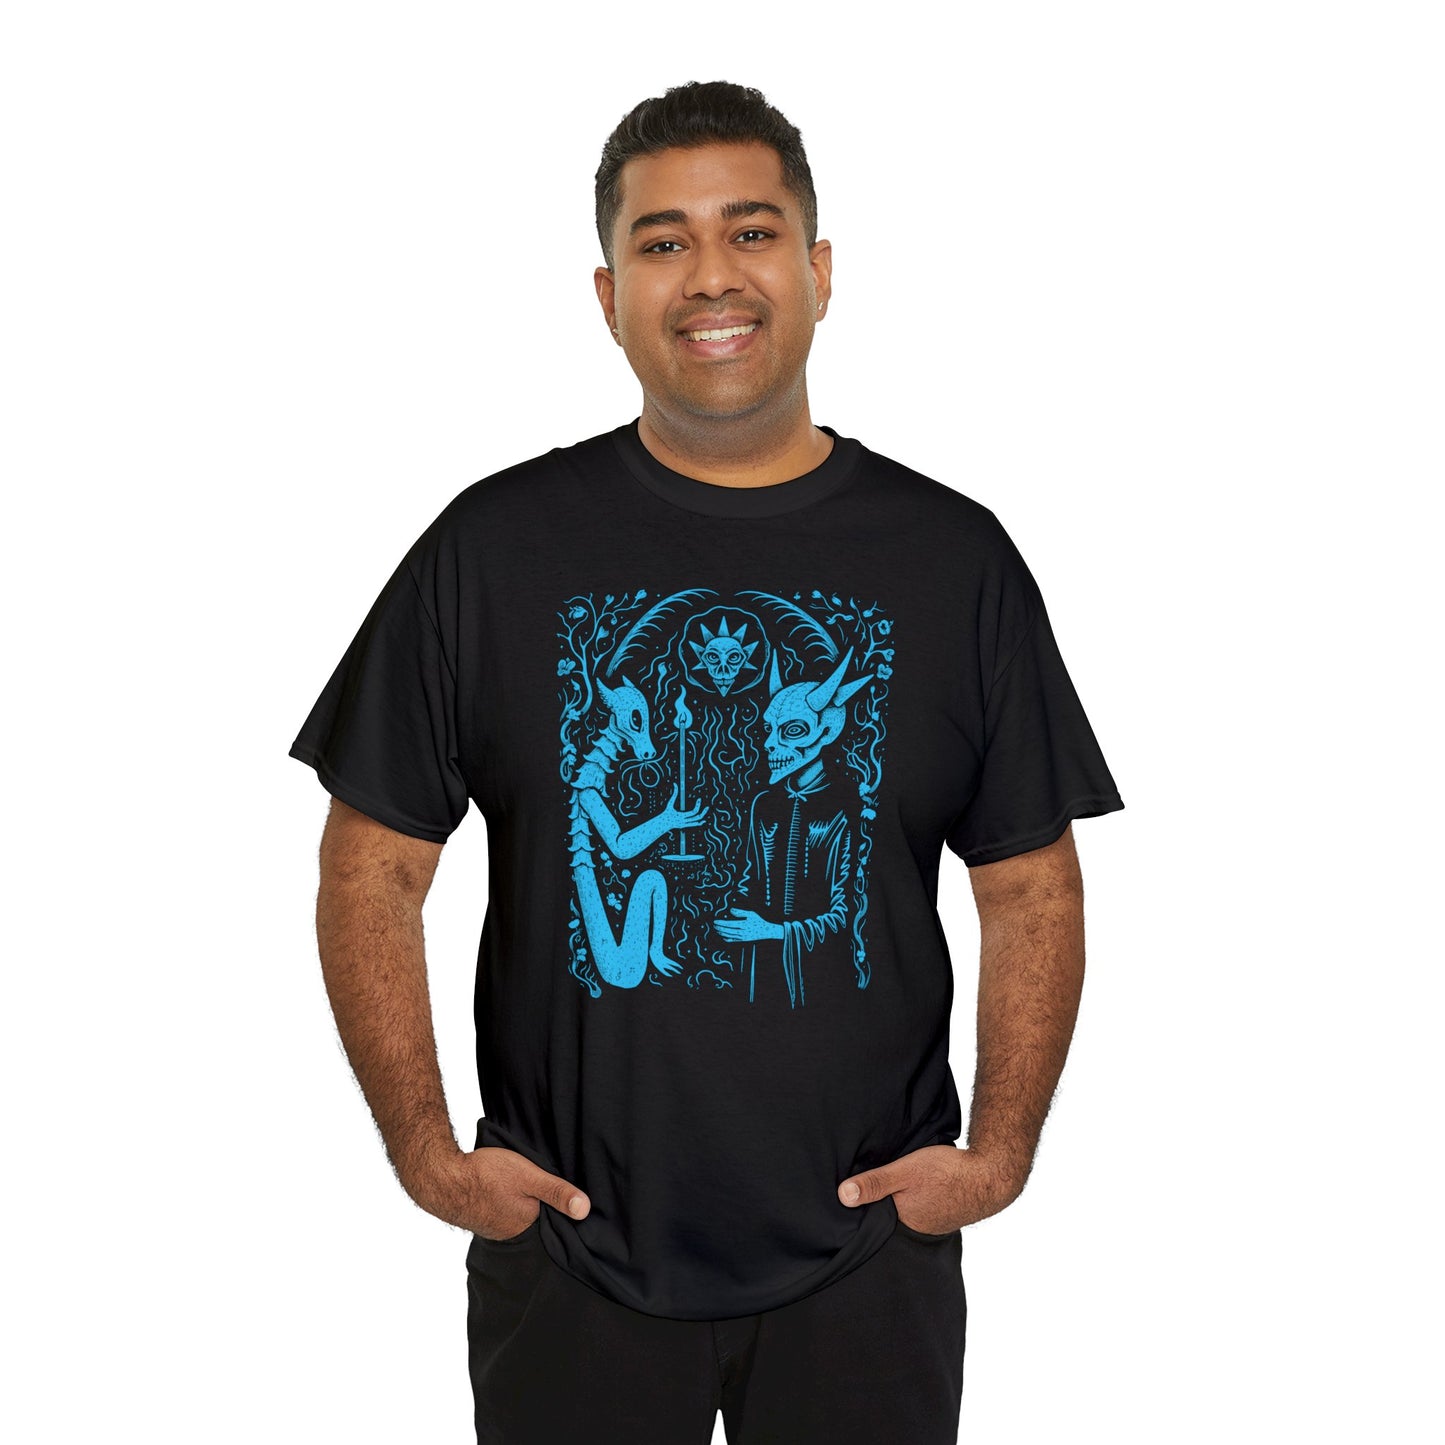 Unisex T-shirt Pact with the Devil in Blue - Frogos Design